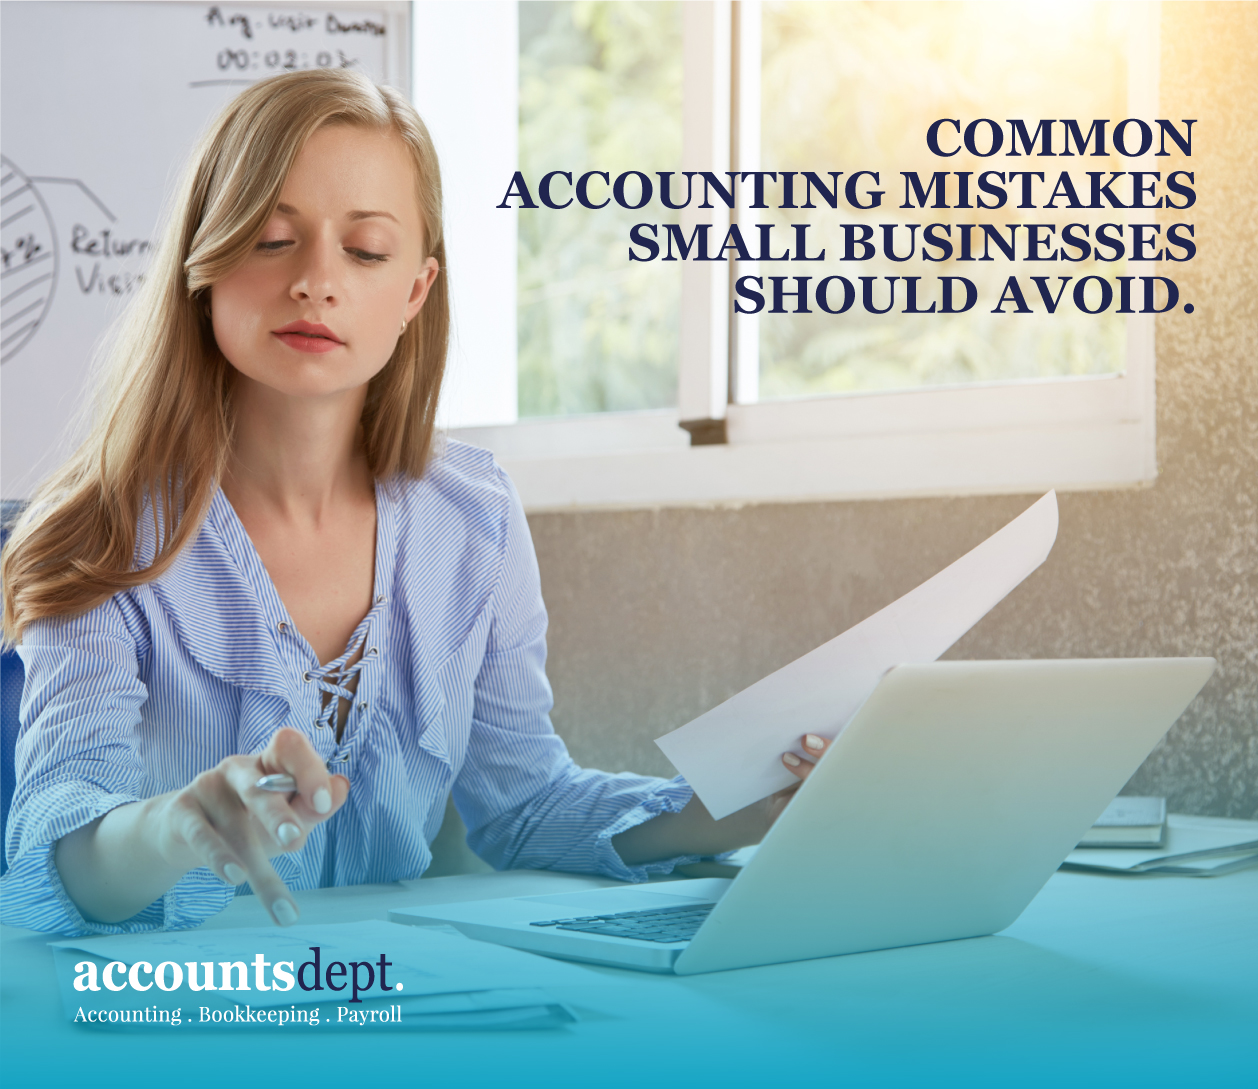 NZ small business accounting services